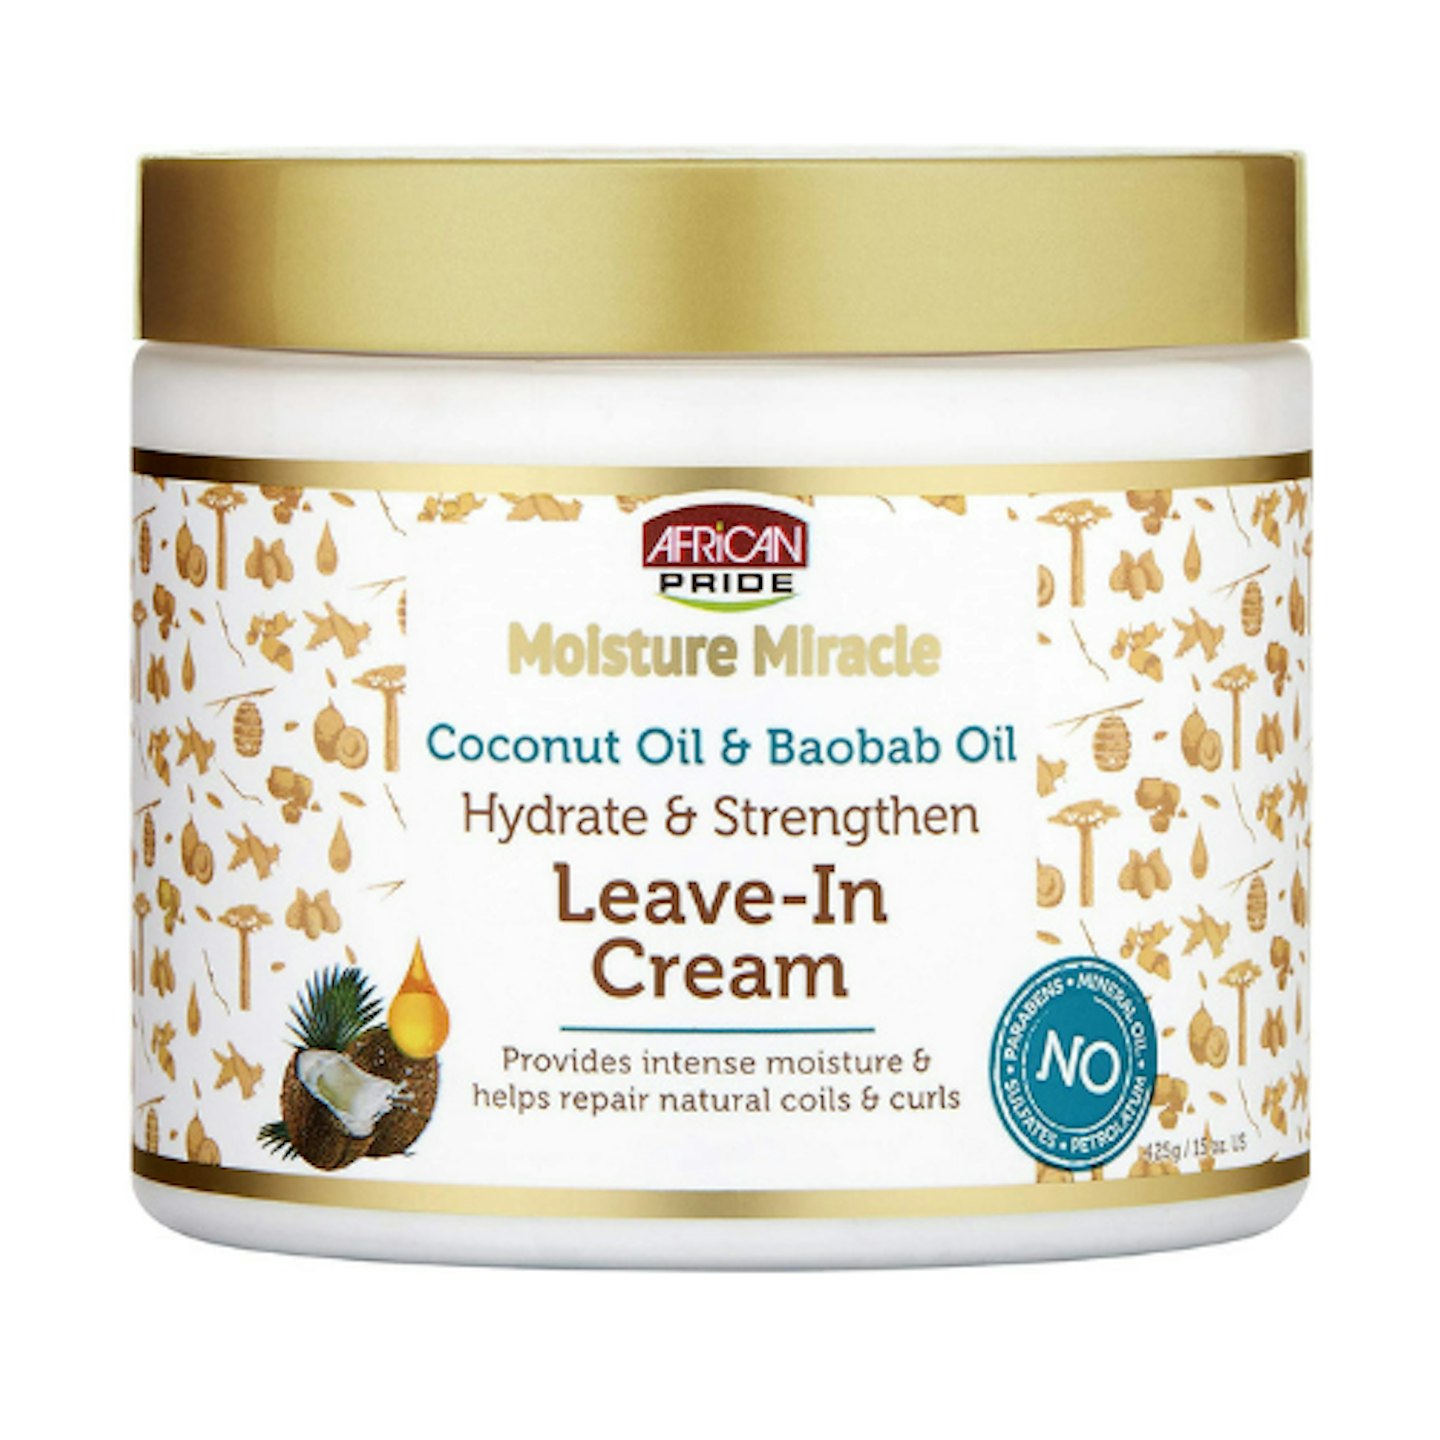 African Pride Moisture Miracle Coconut Oil & Baobab Oil Hydrate and Strengthen Leave In Cream